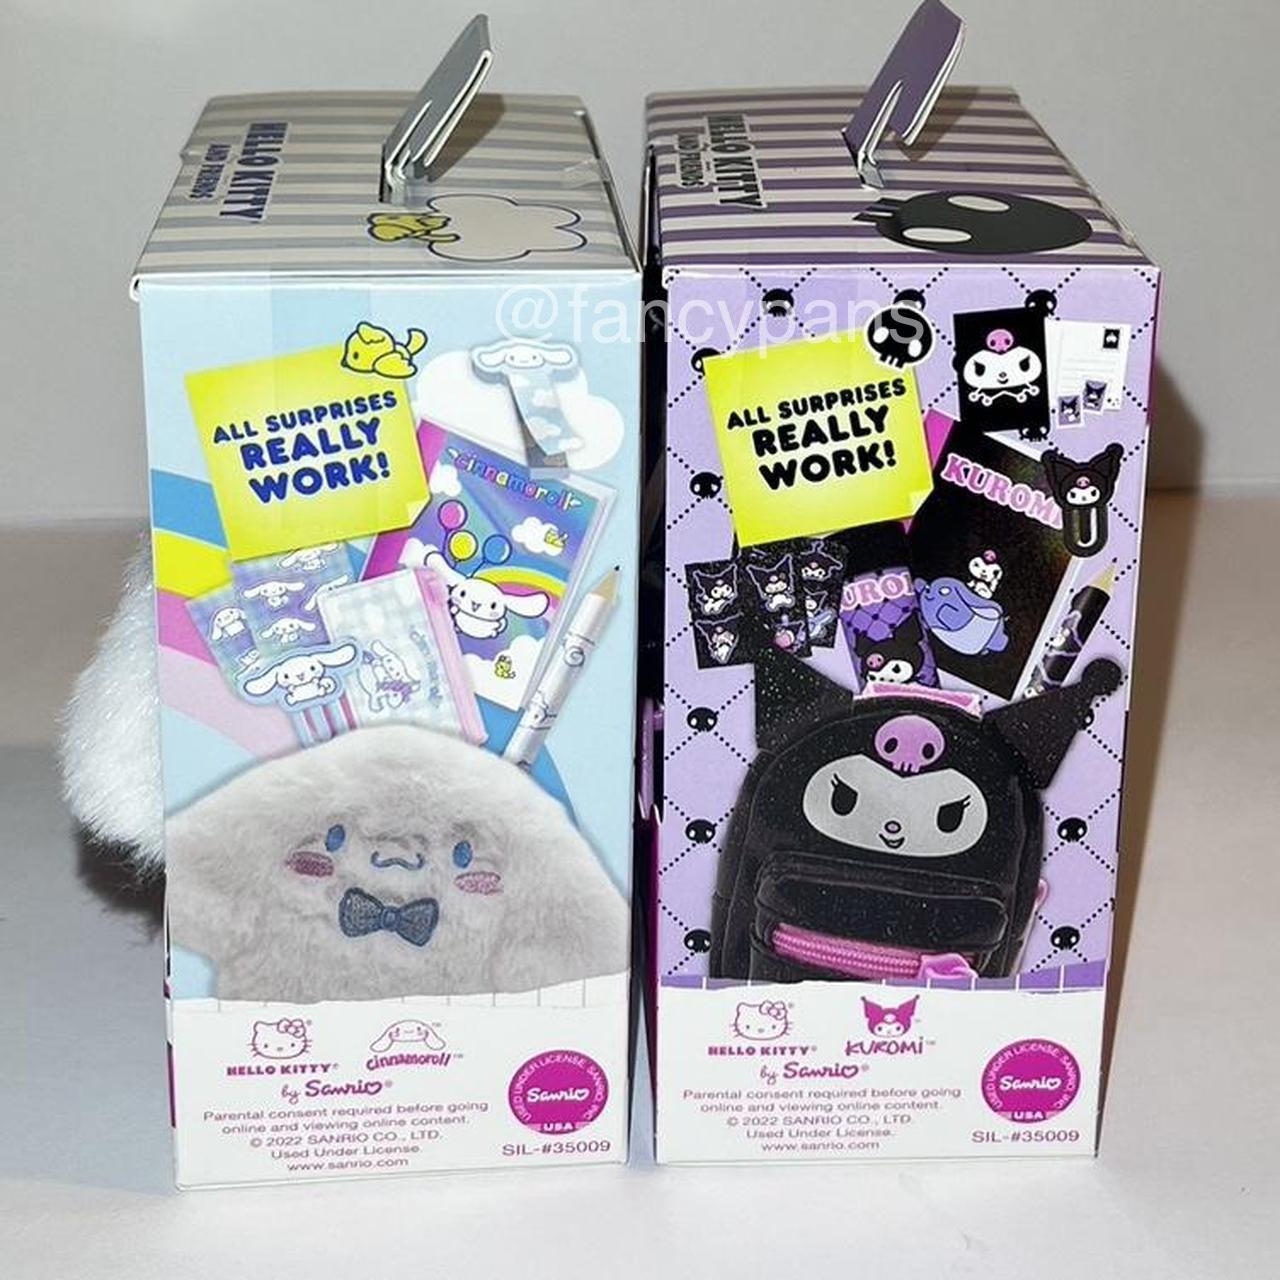 REAL LITTLES - Collectible Micro Hello Kitty and Friends Backpack with 6  Surprise Accessories Inside! (Kuromi)